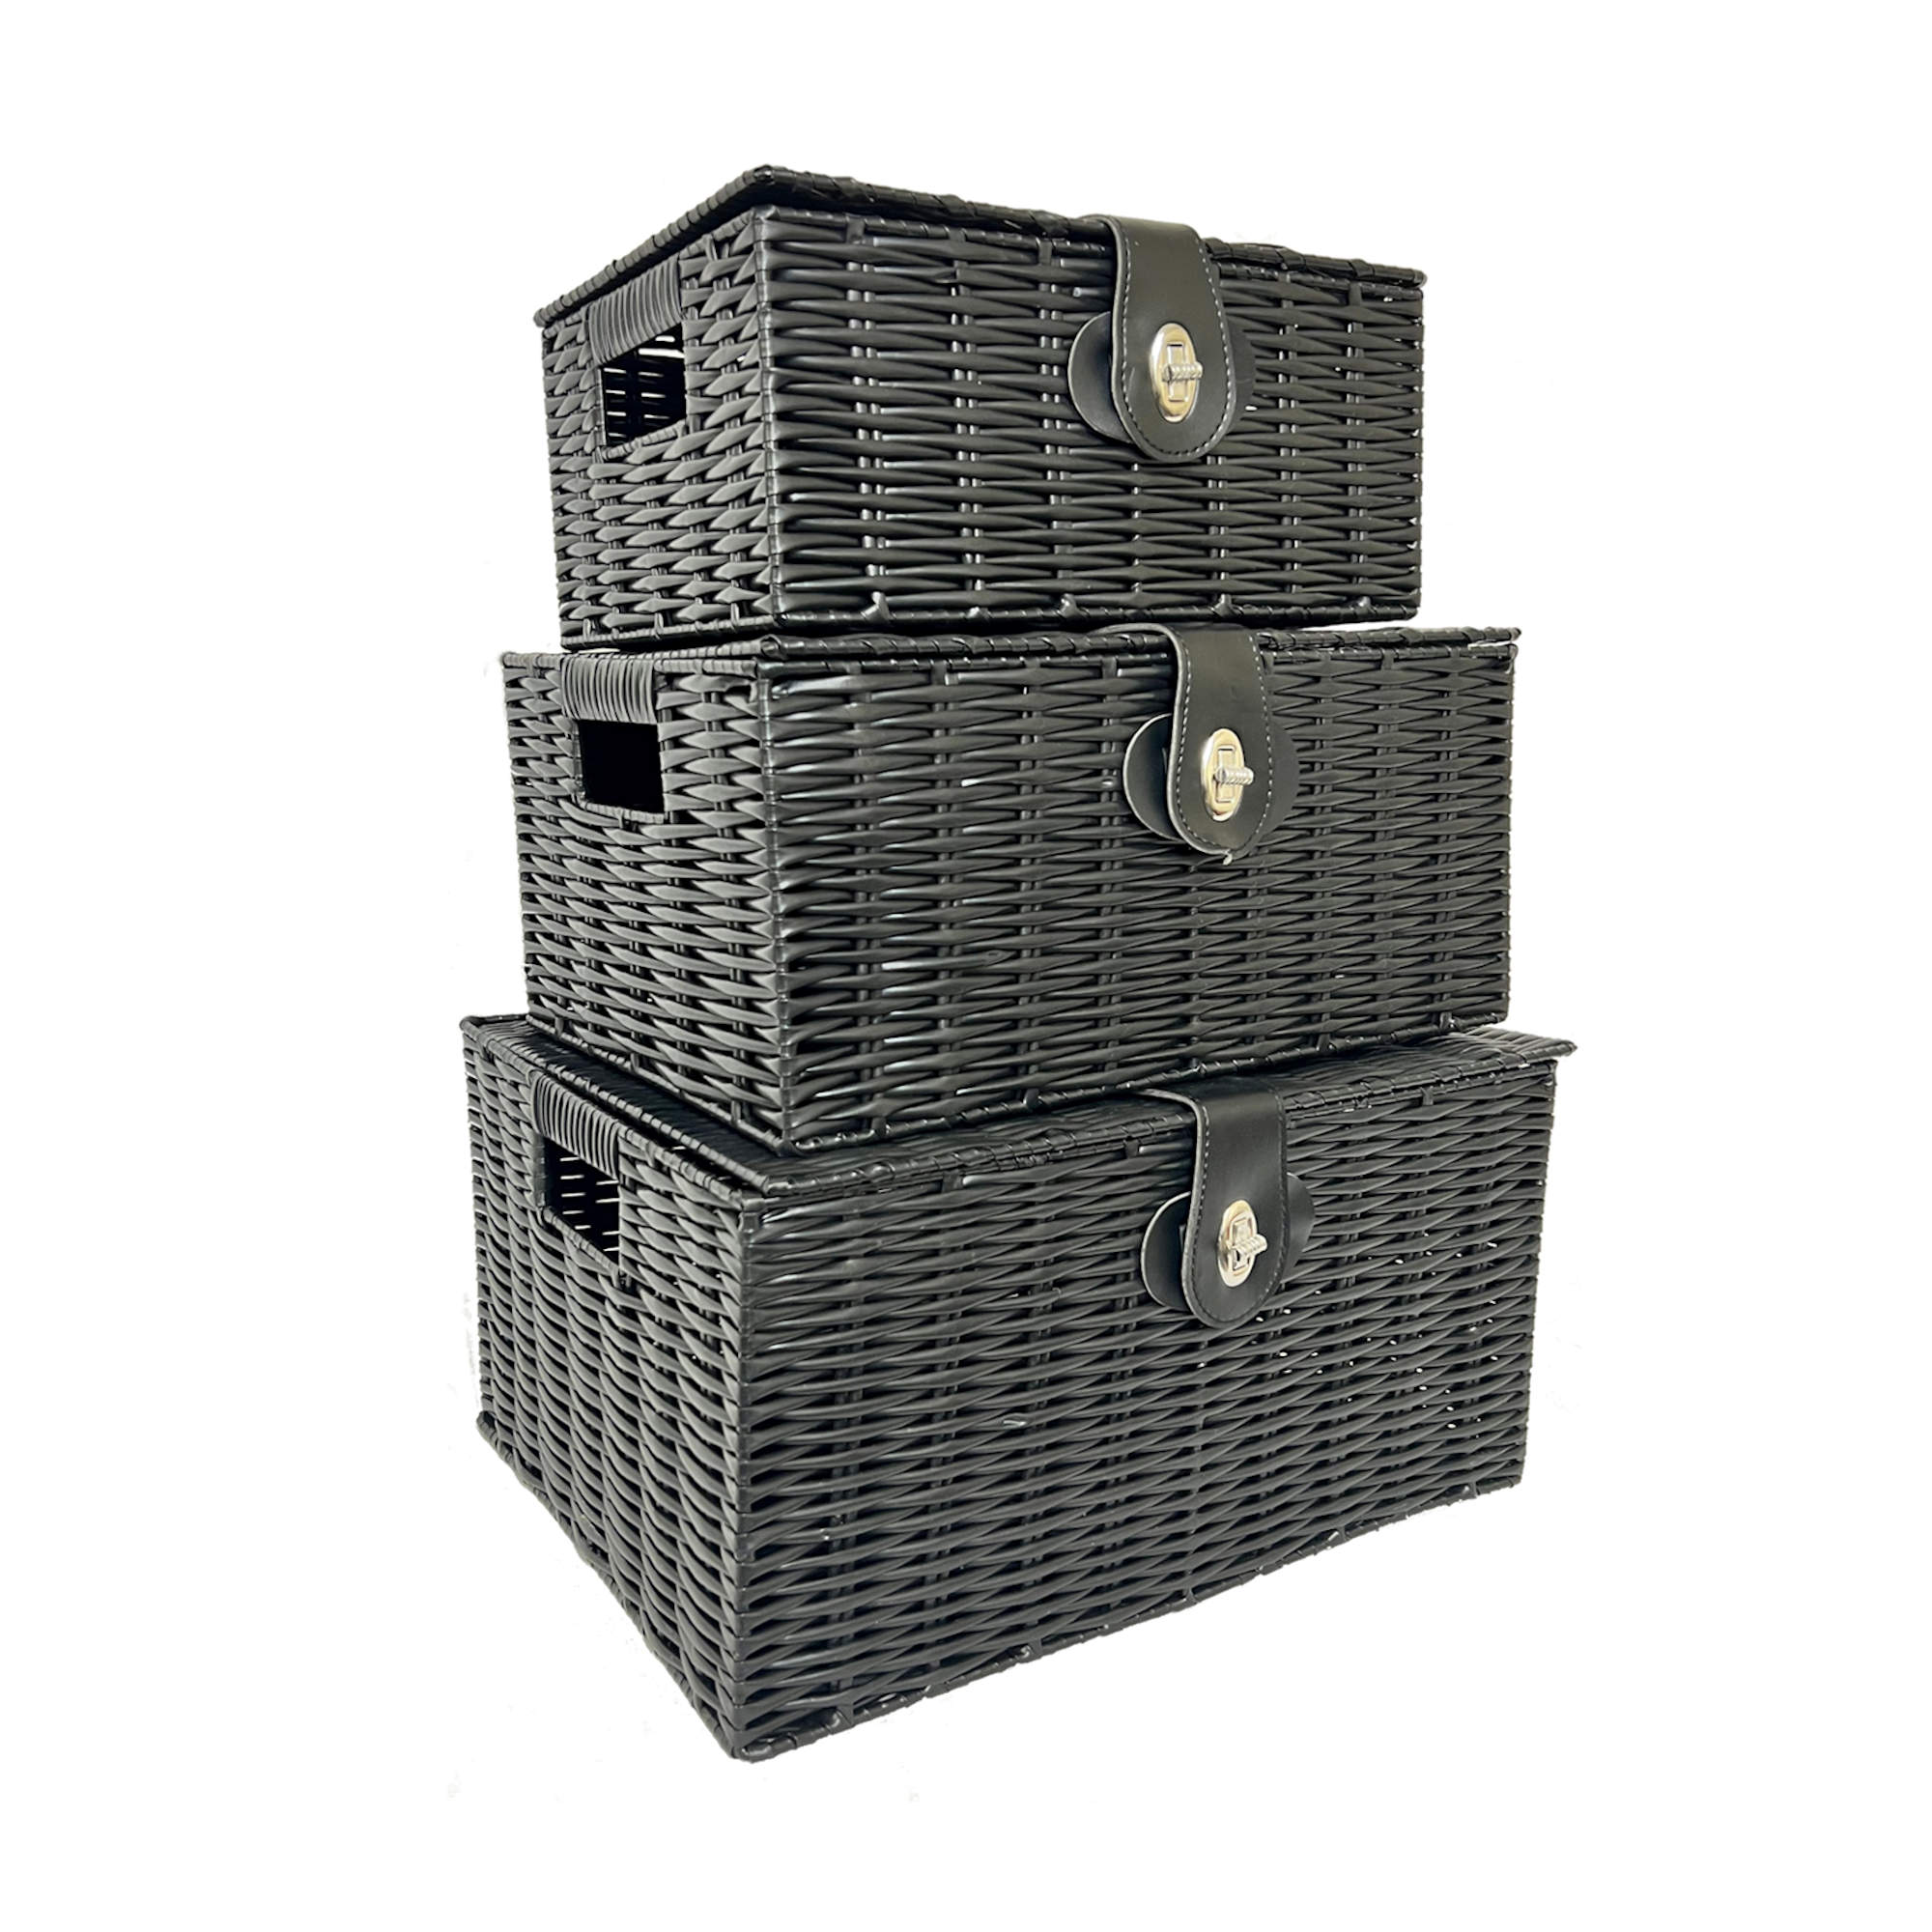 Set of 3 Black Resin Woven Wicker Style Baskets Hampers Storage Boxes